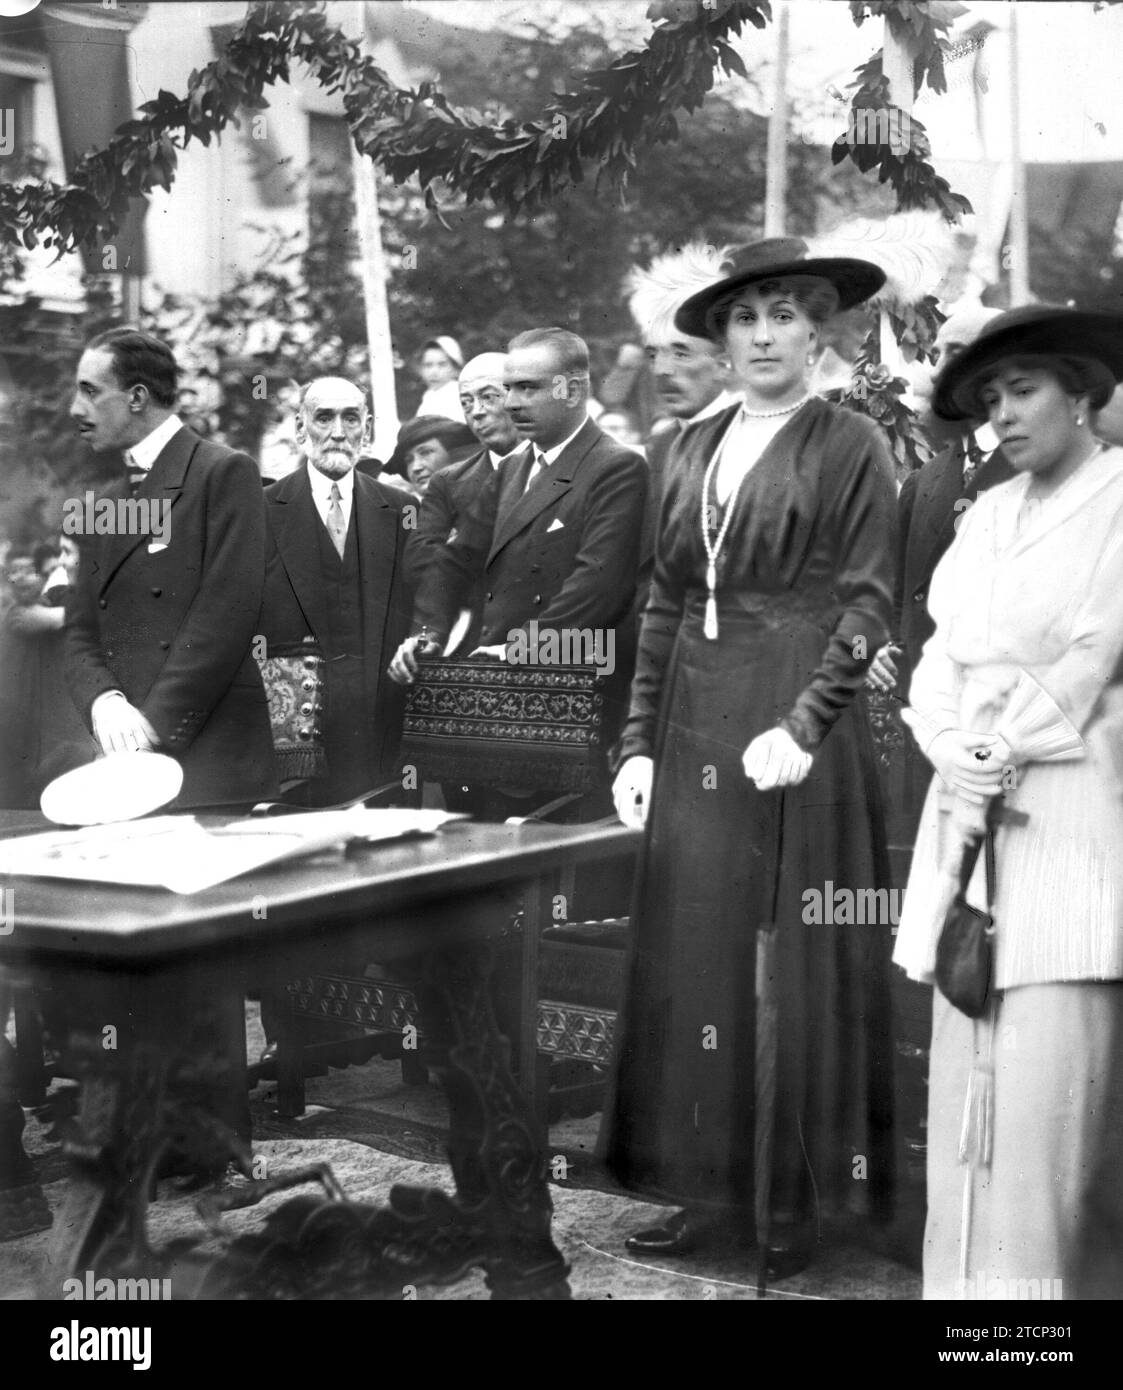 07/31/1915. The Kings in Bilbao. H.H. Mm. with the Princess of Salm-Salm, at the ceremony of laying the first stone of a house in Irala-Harri. Credit: Album / Archivo ABC / Ramón Alba Stock Photo